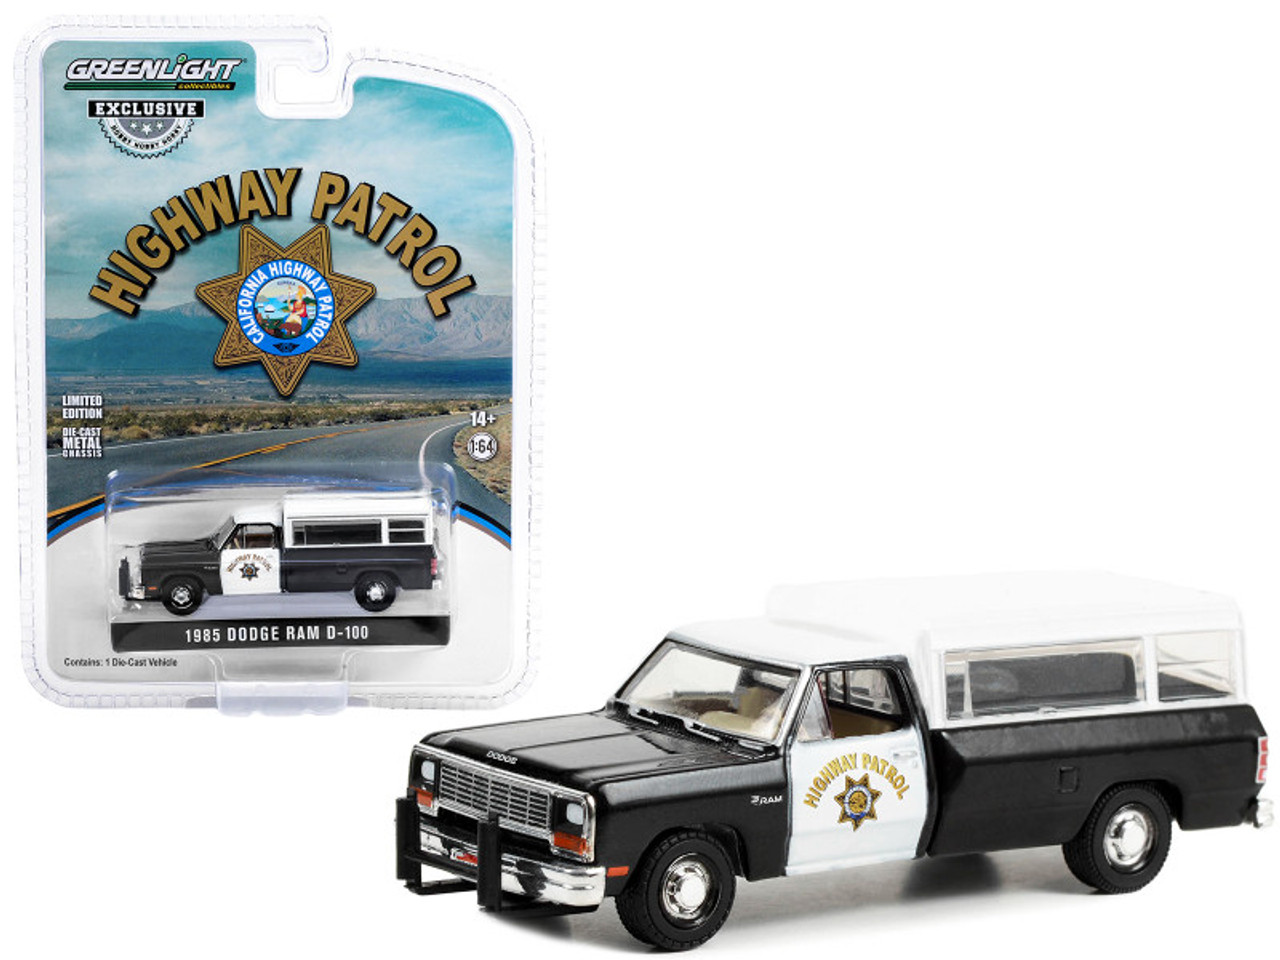 1985 Dodge Ram D-100 Pickup Truck Black and White "California Highway Patrol" with Camper Shell "Hobby Exclusive" Series 1/64 Diecast Model Car by Greenlight